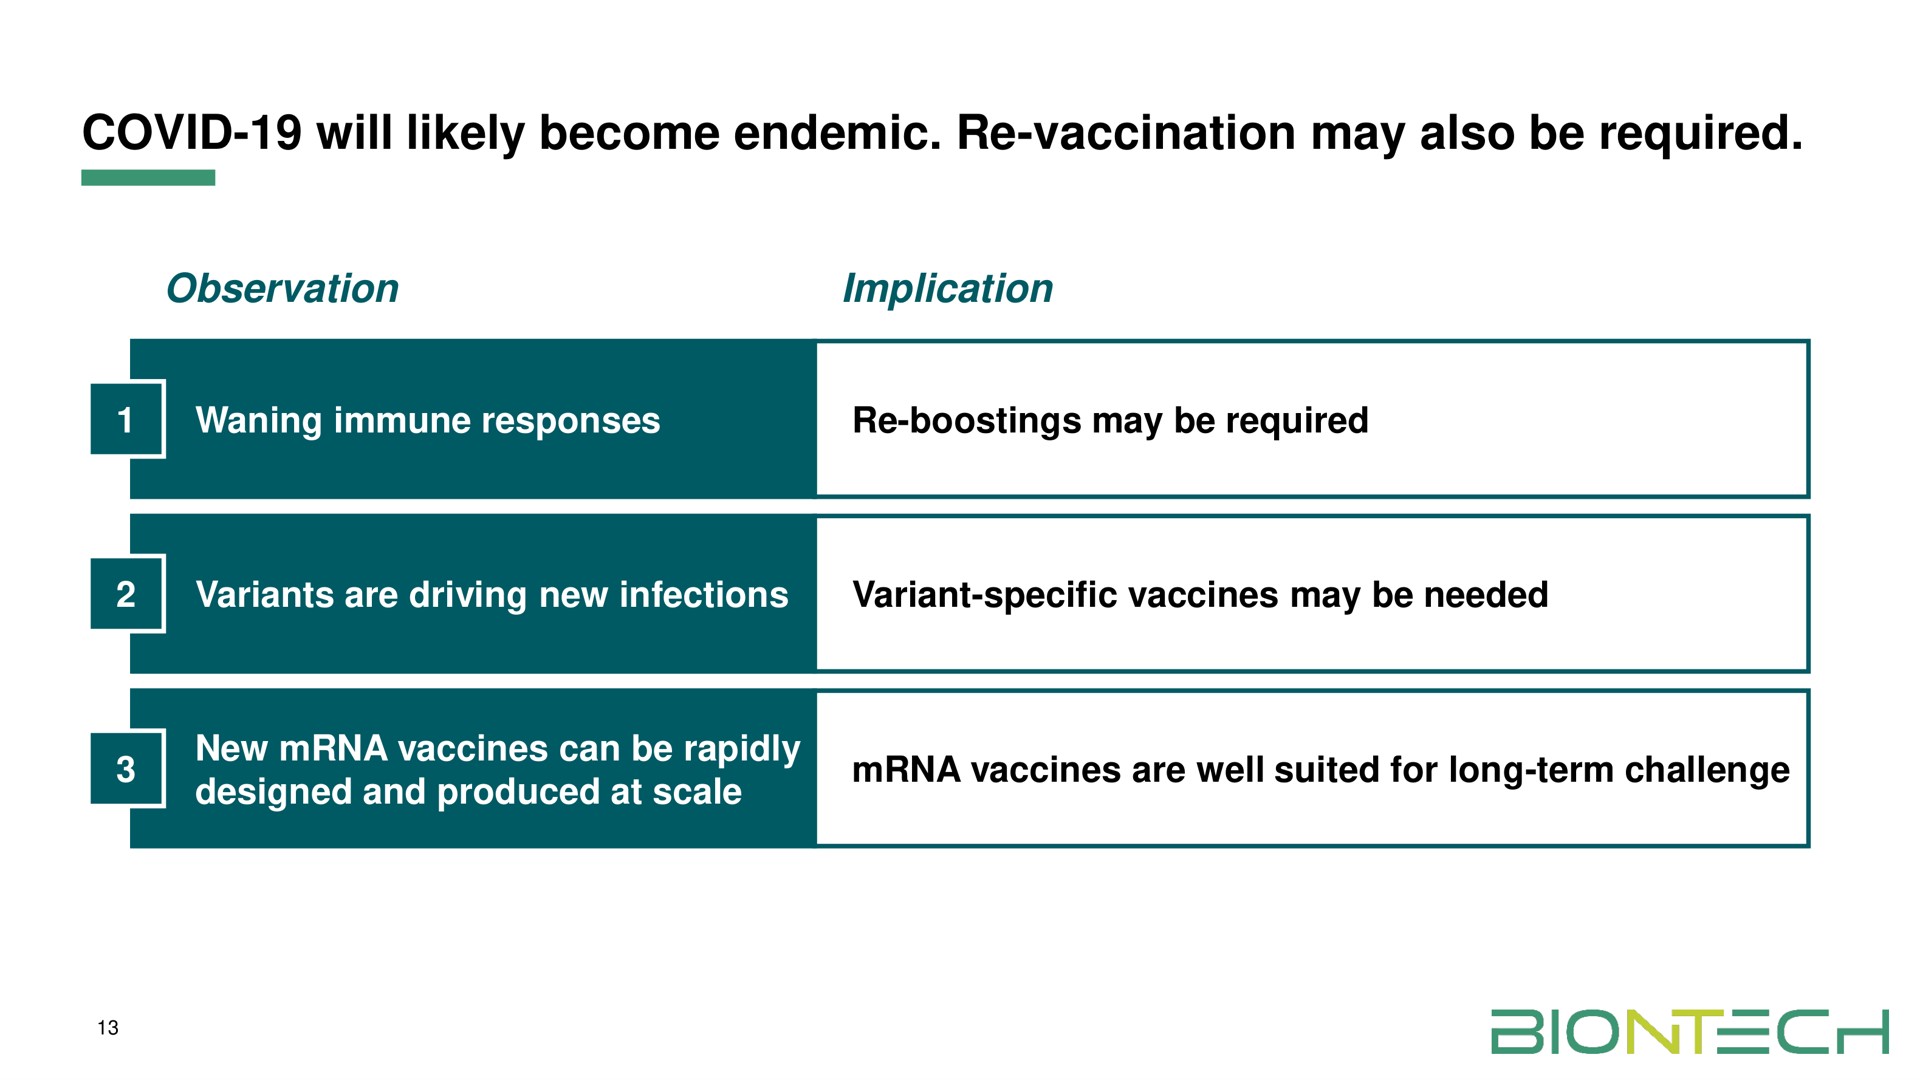 covid will likely become endemic vaccination may also be required observation implication | BioNTech